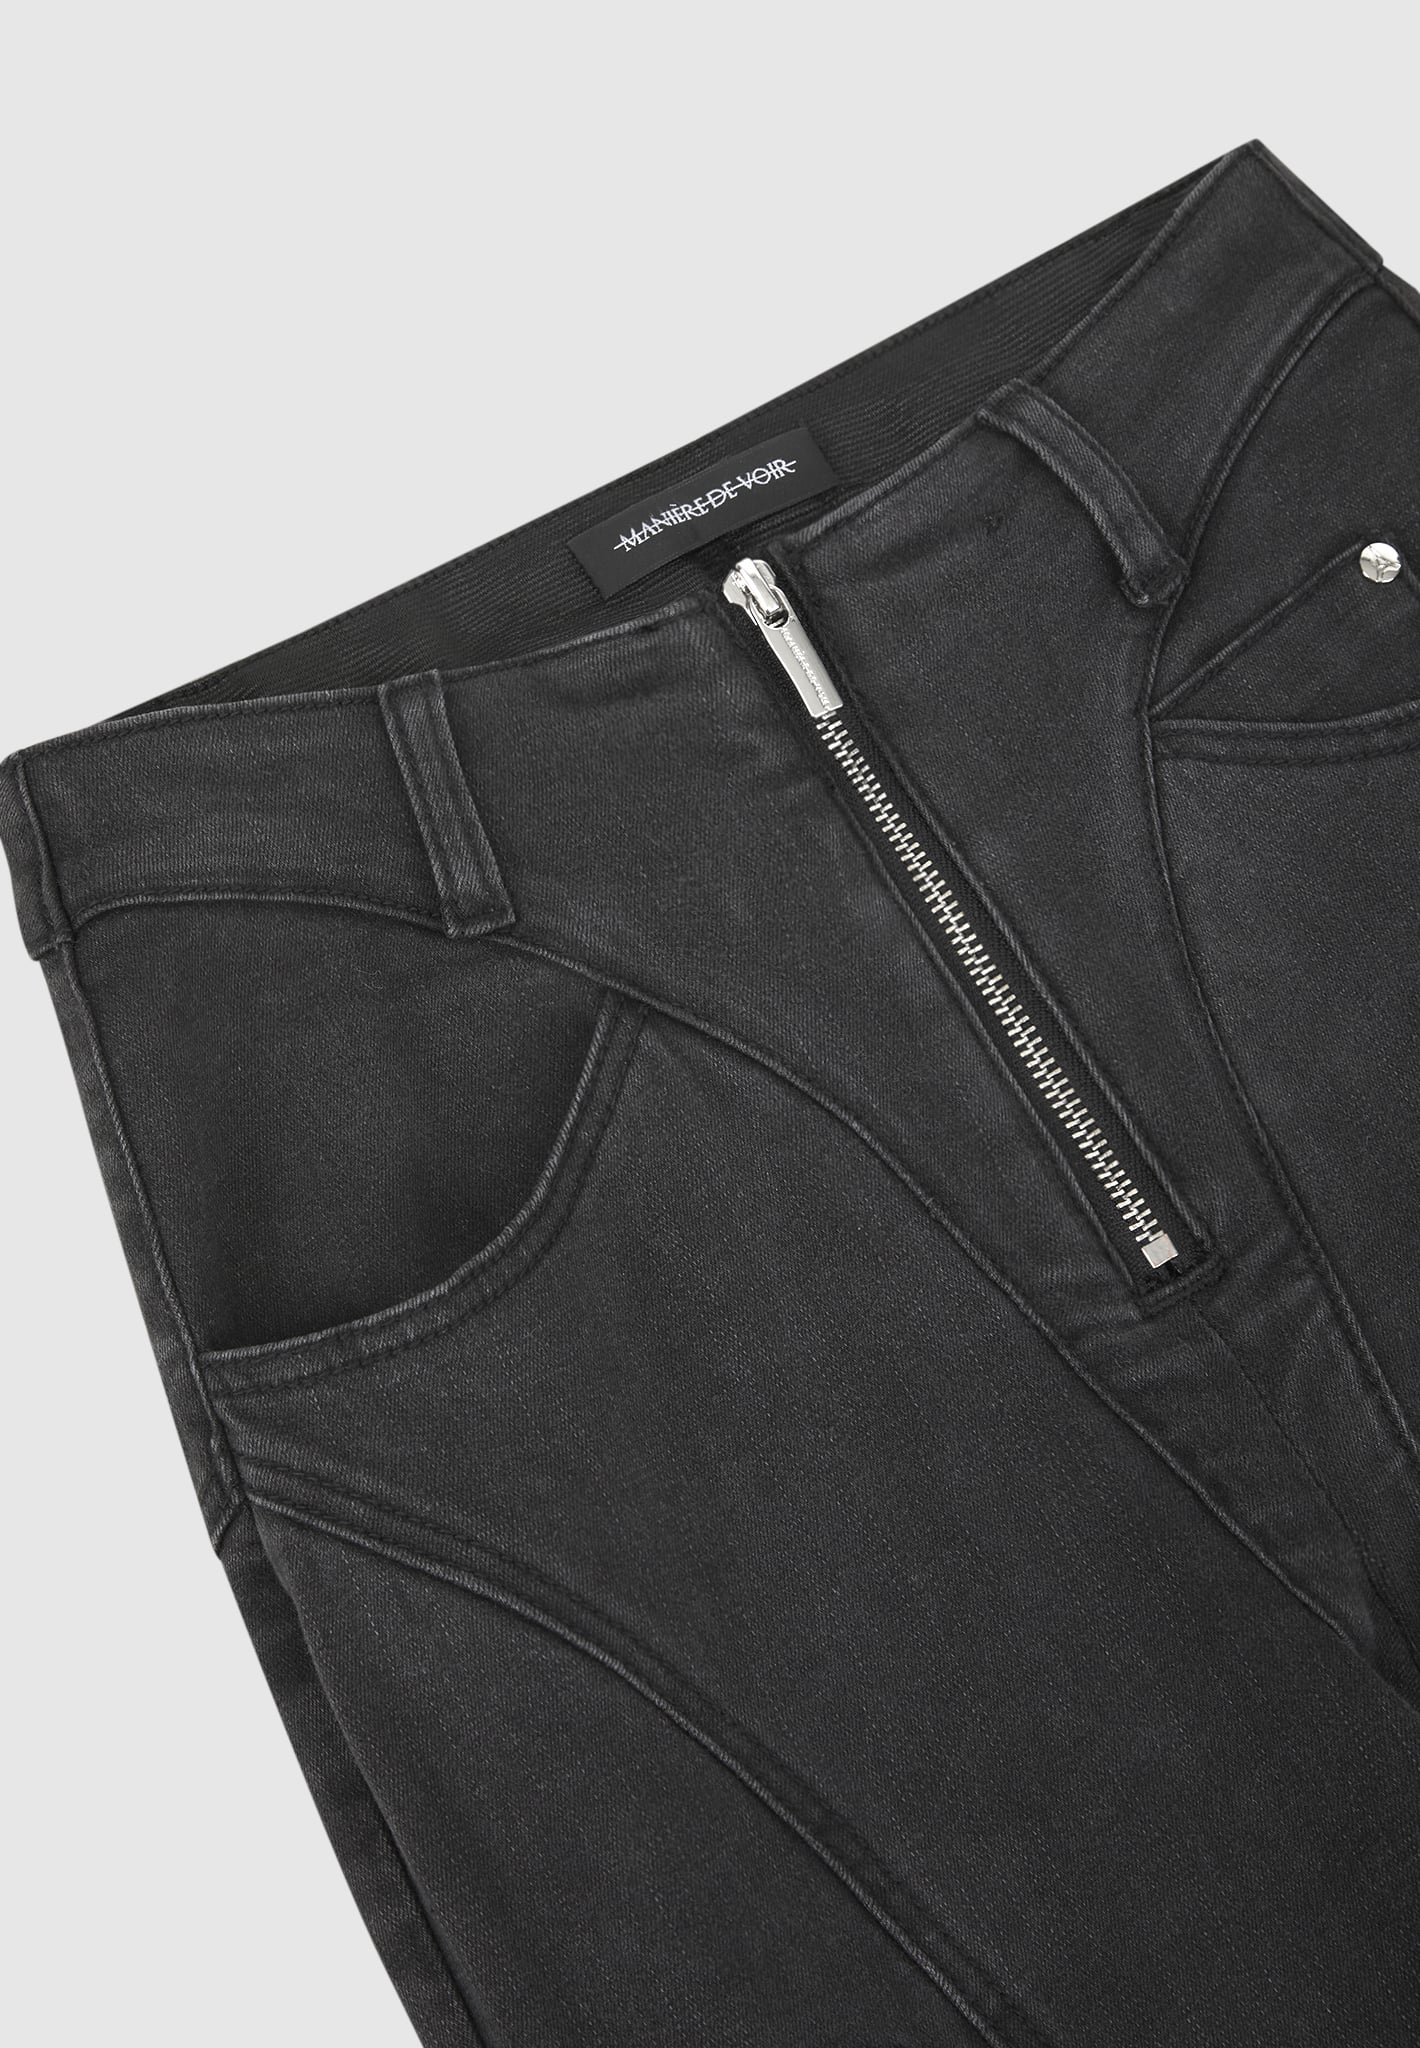 Buy Urban Utility: 6-Pocket Black Jeans for Women and Girls (26, Black) at